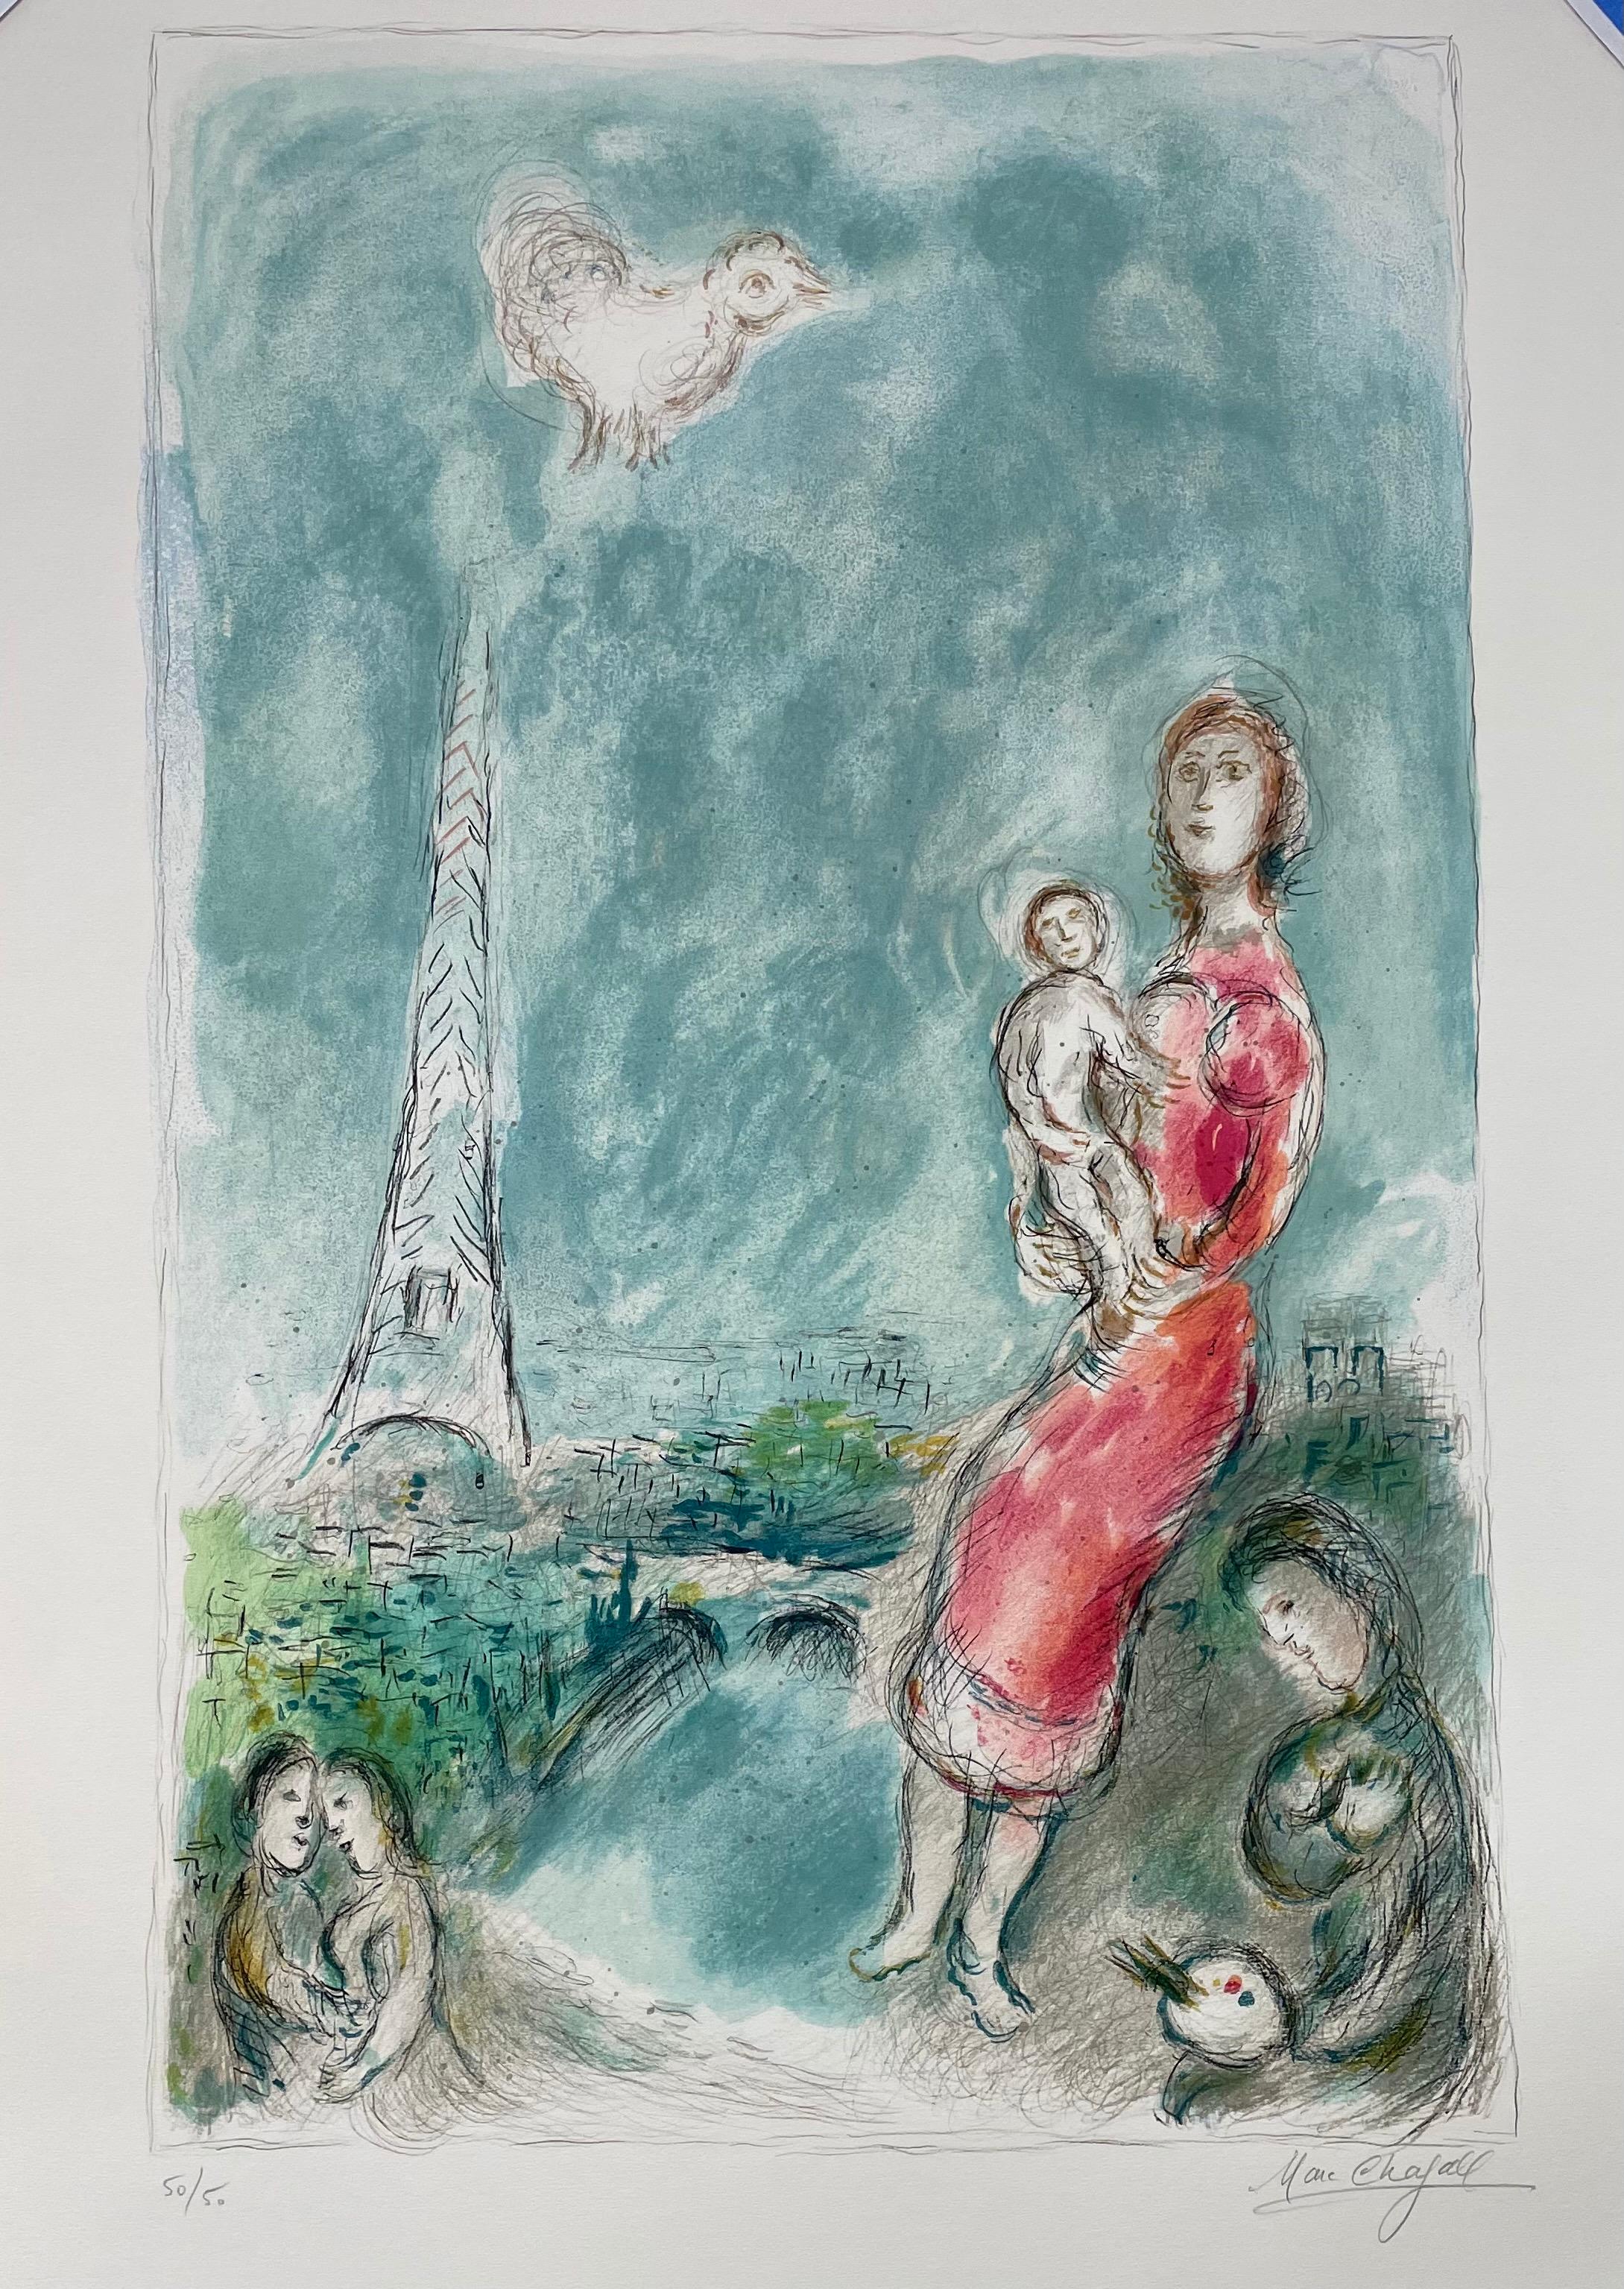 Marc Chagall, "Red Maternity", original lithograph, hand signed 